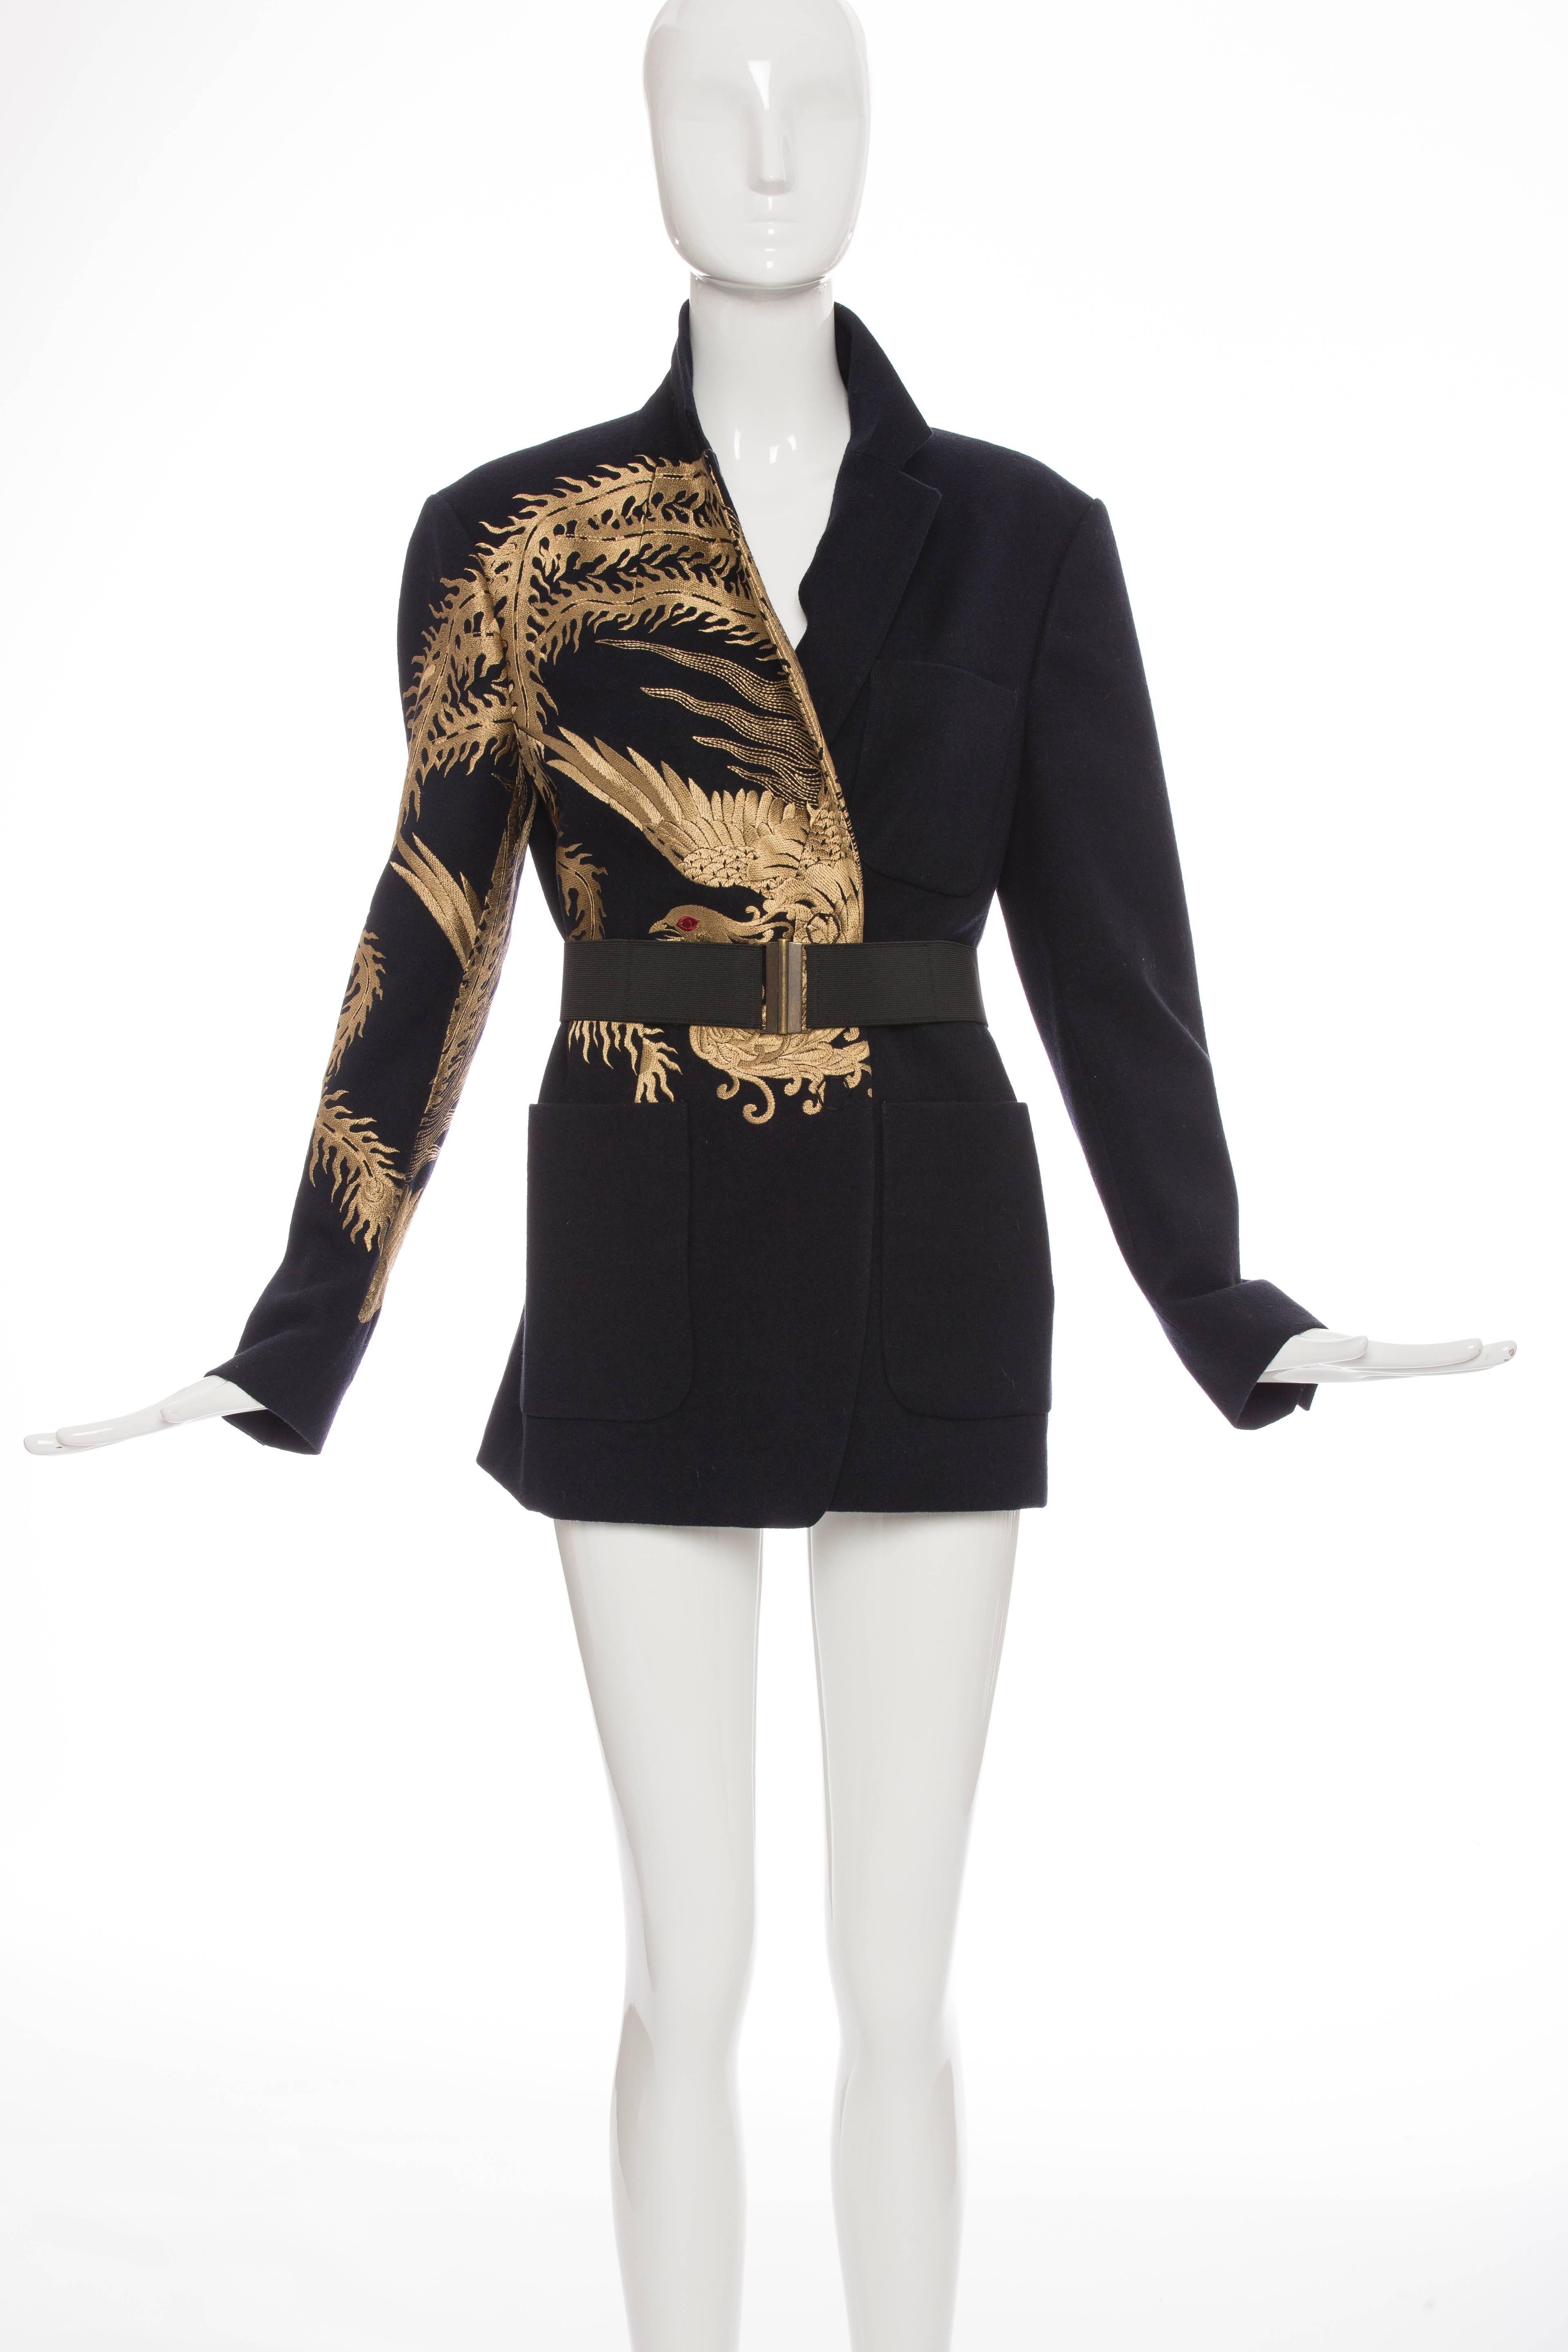 Dries Van Noten, Autumn-Winter 2012, navy blue, wool jacket with gold-tone embroidery, three pockets, hidden dual snap closures at front and belt.

FR. 38
US. 6

Bust 32”, Waist 32”, Shoulder 18”, Length 28”, Sleeve 25”

Fabric Content: 82%